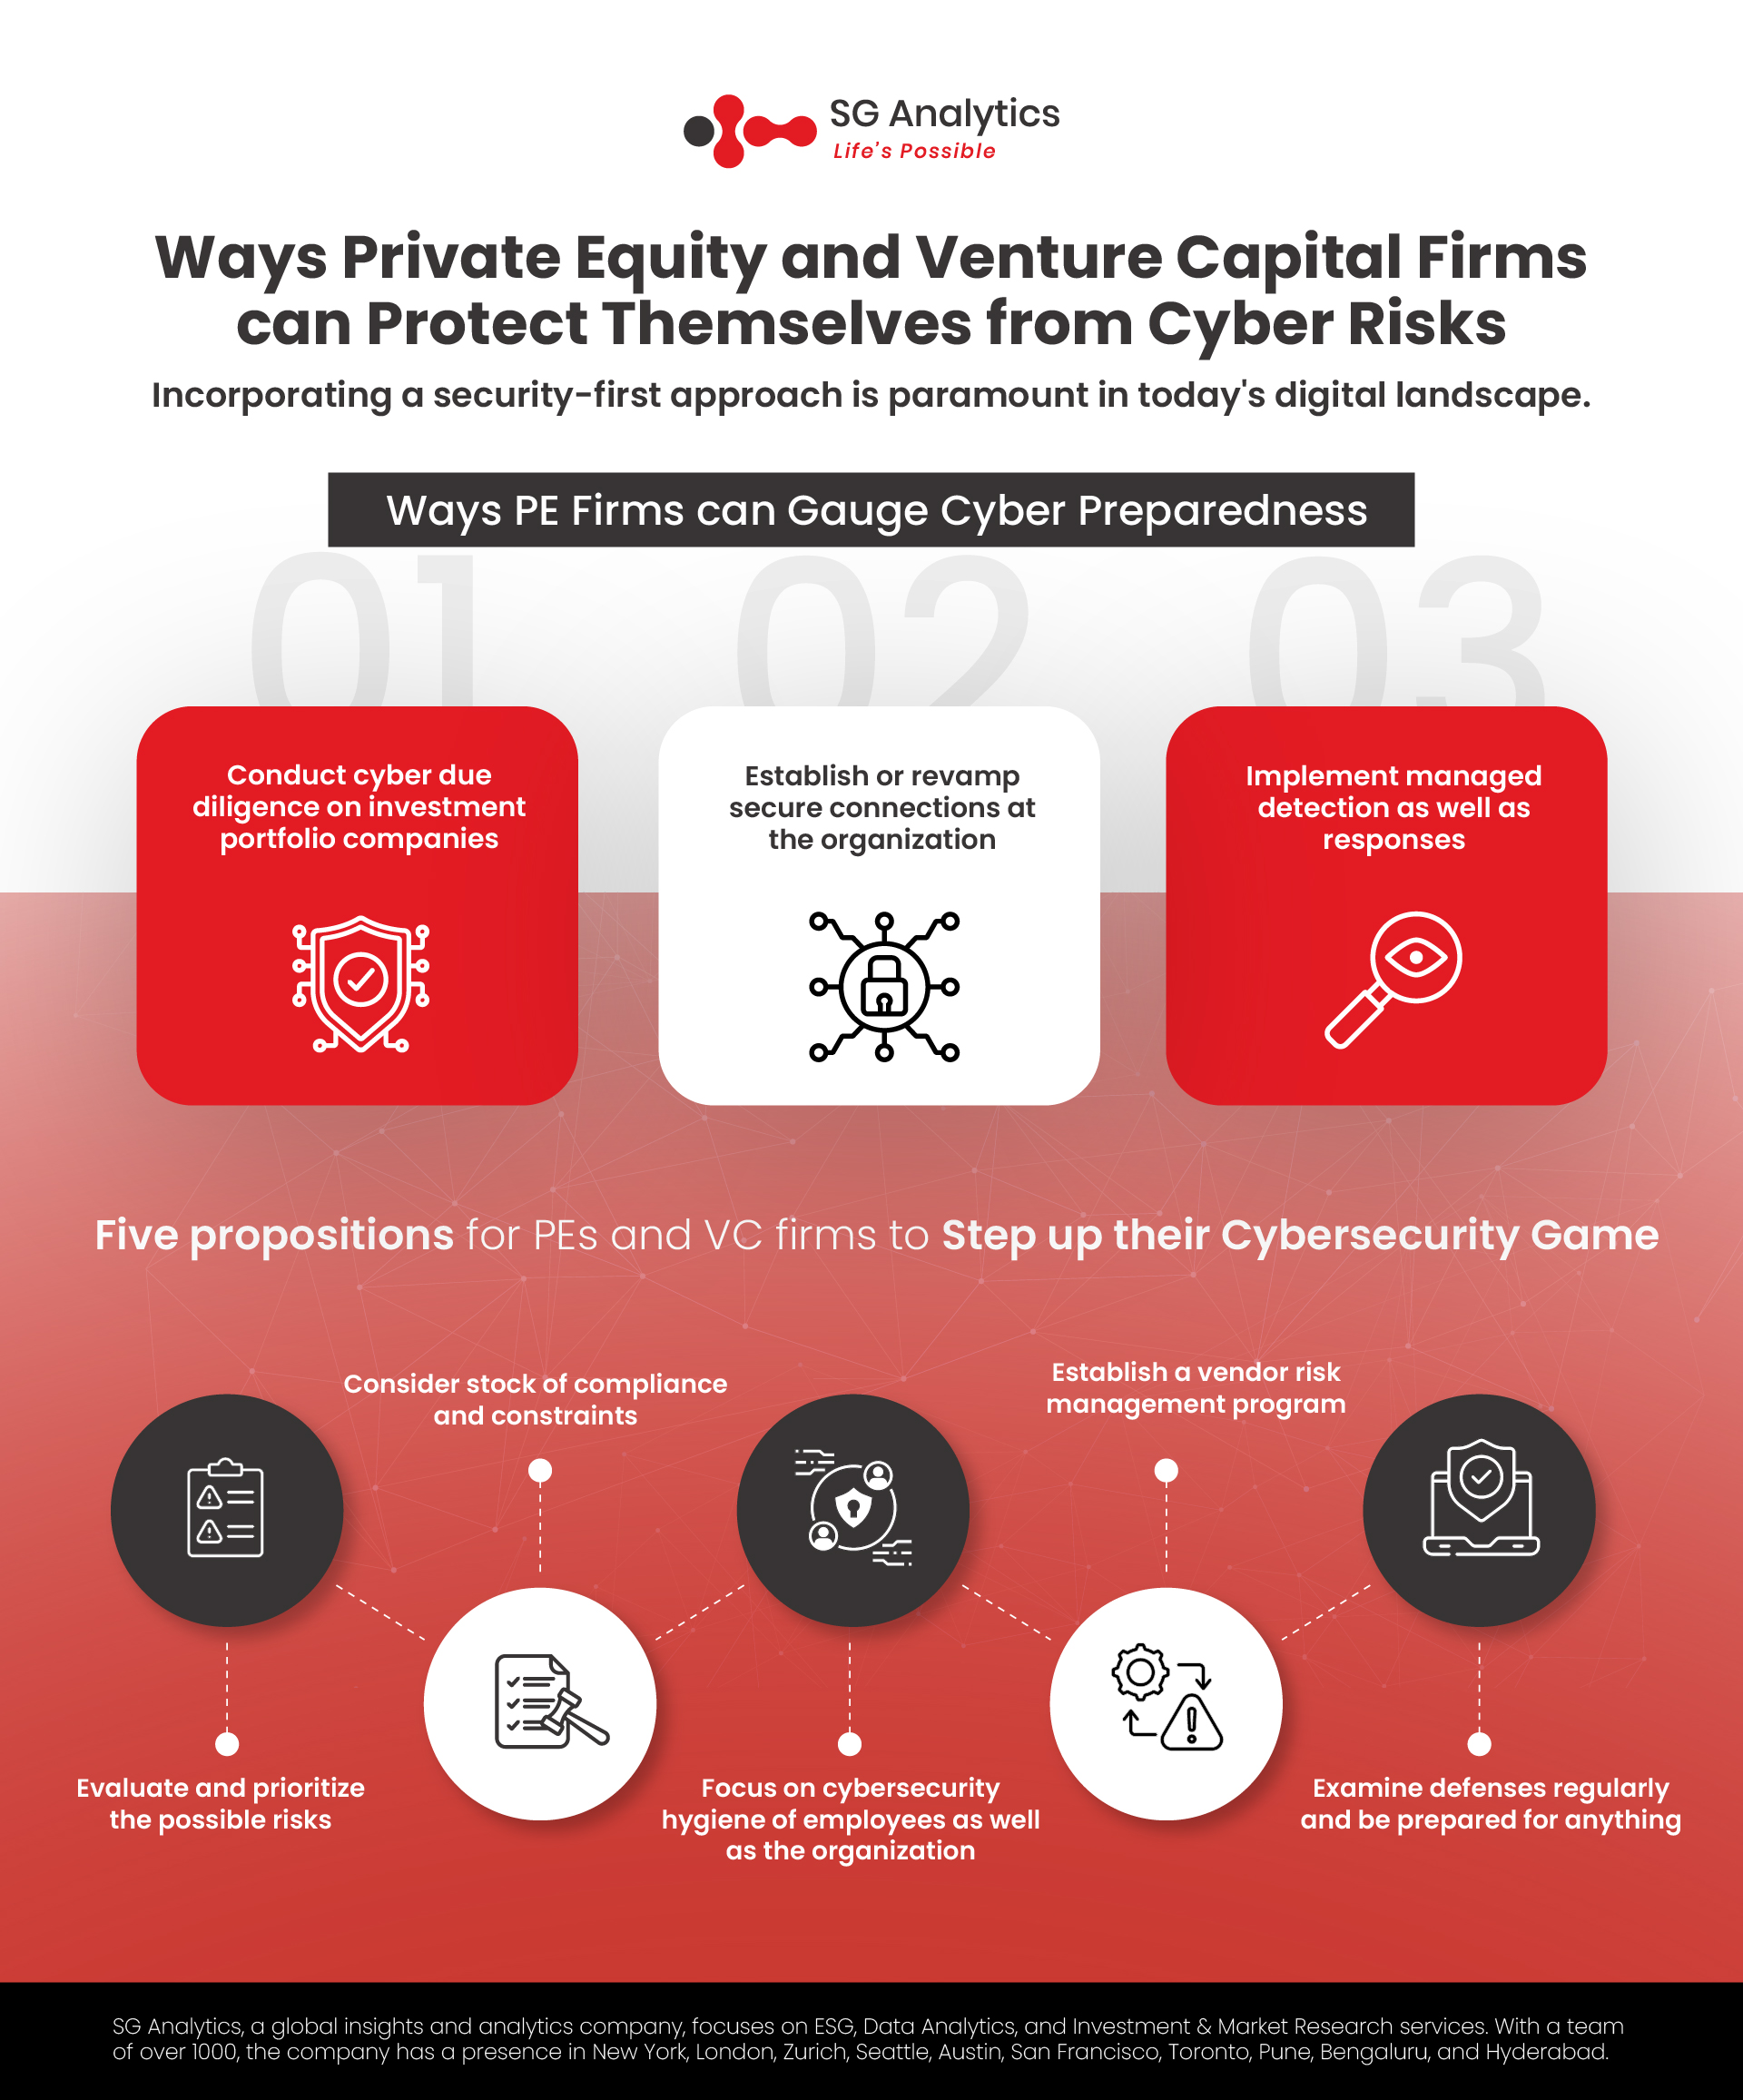 SG Analytics_Ways Private Equity and Venture Capital Firms can Protect Themselves from Cyber Risks